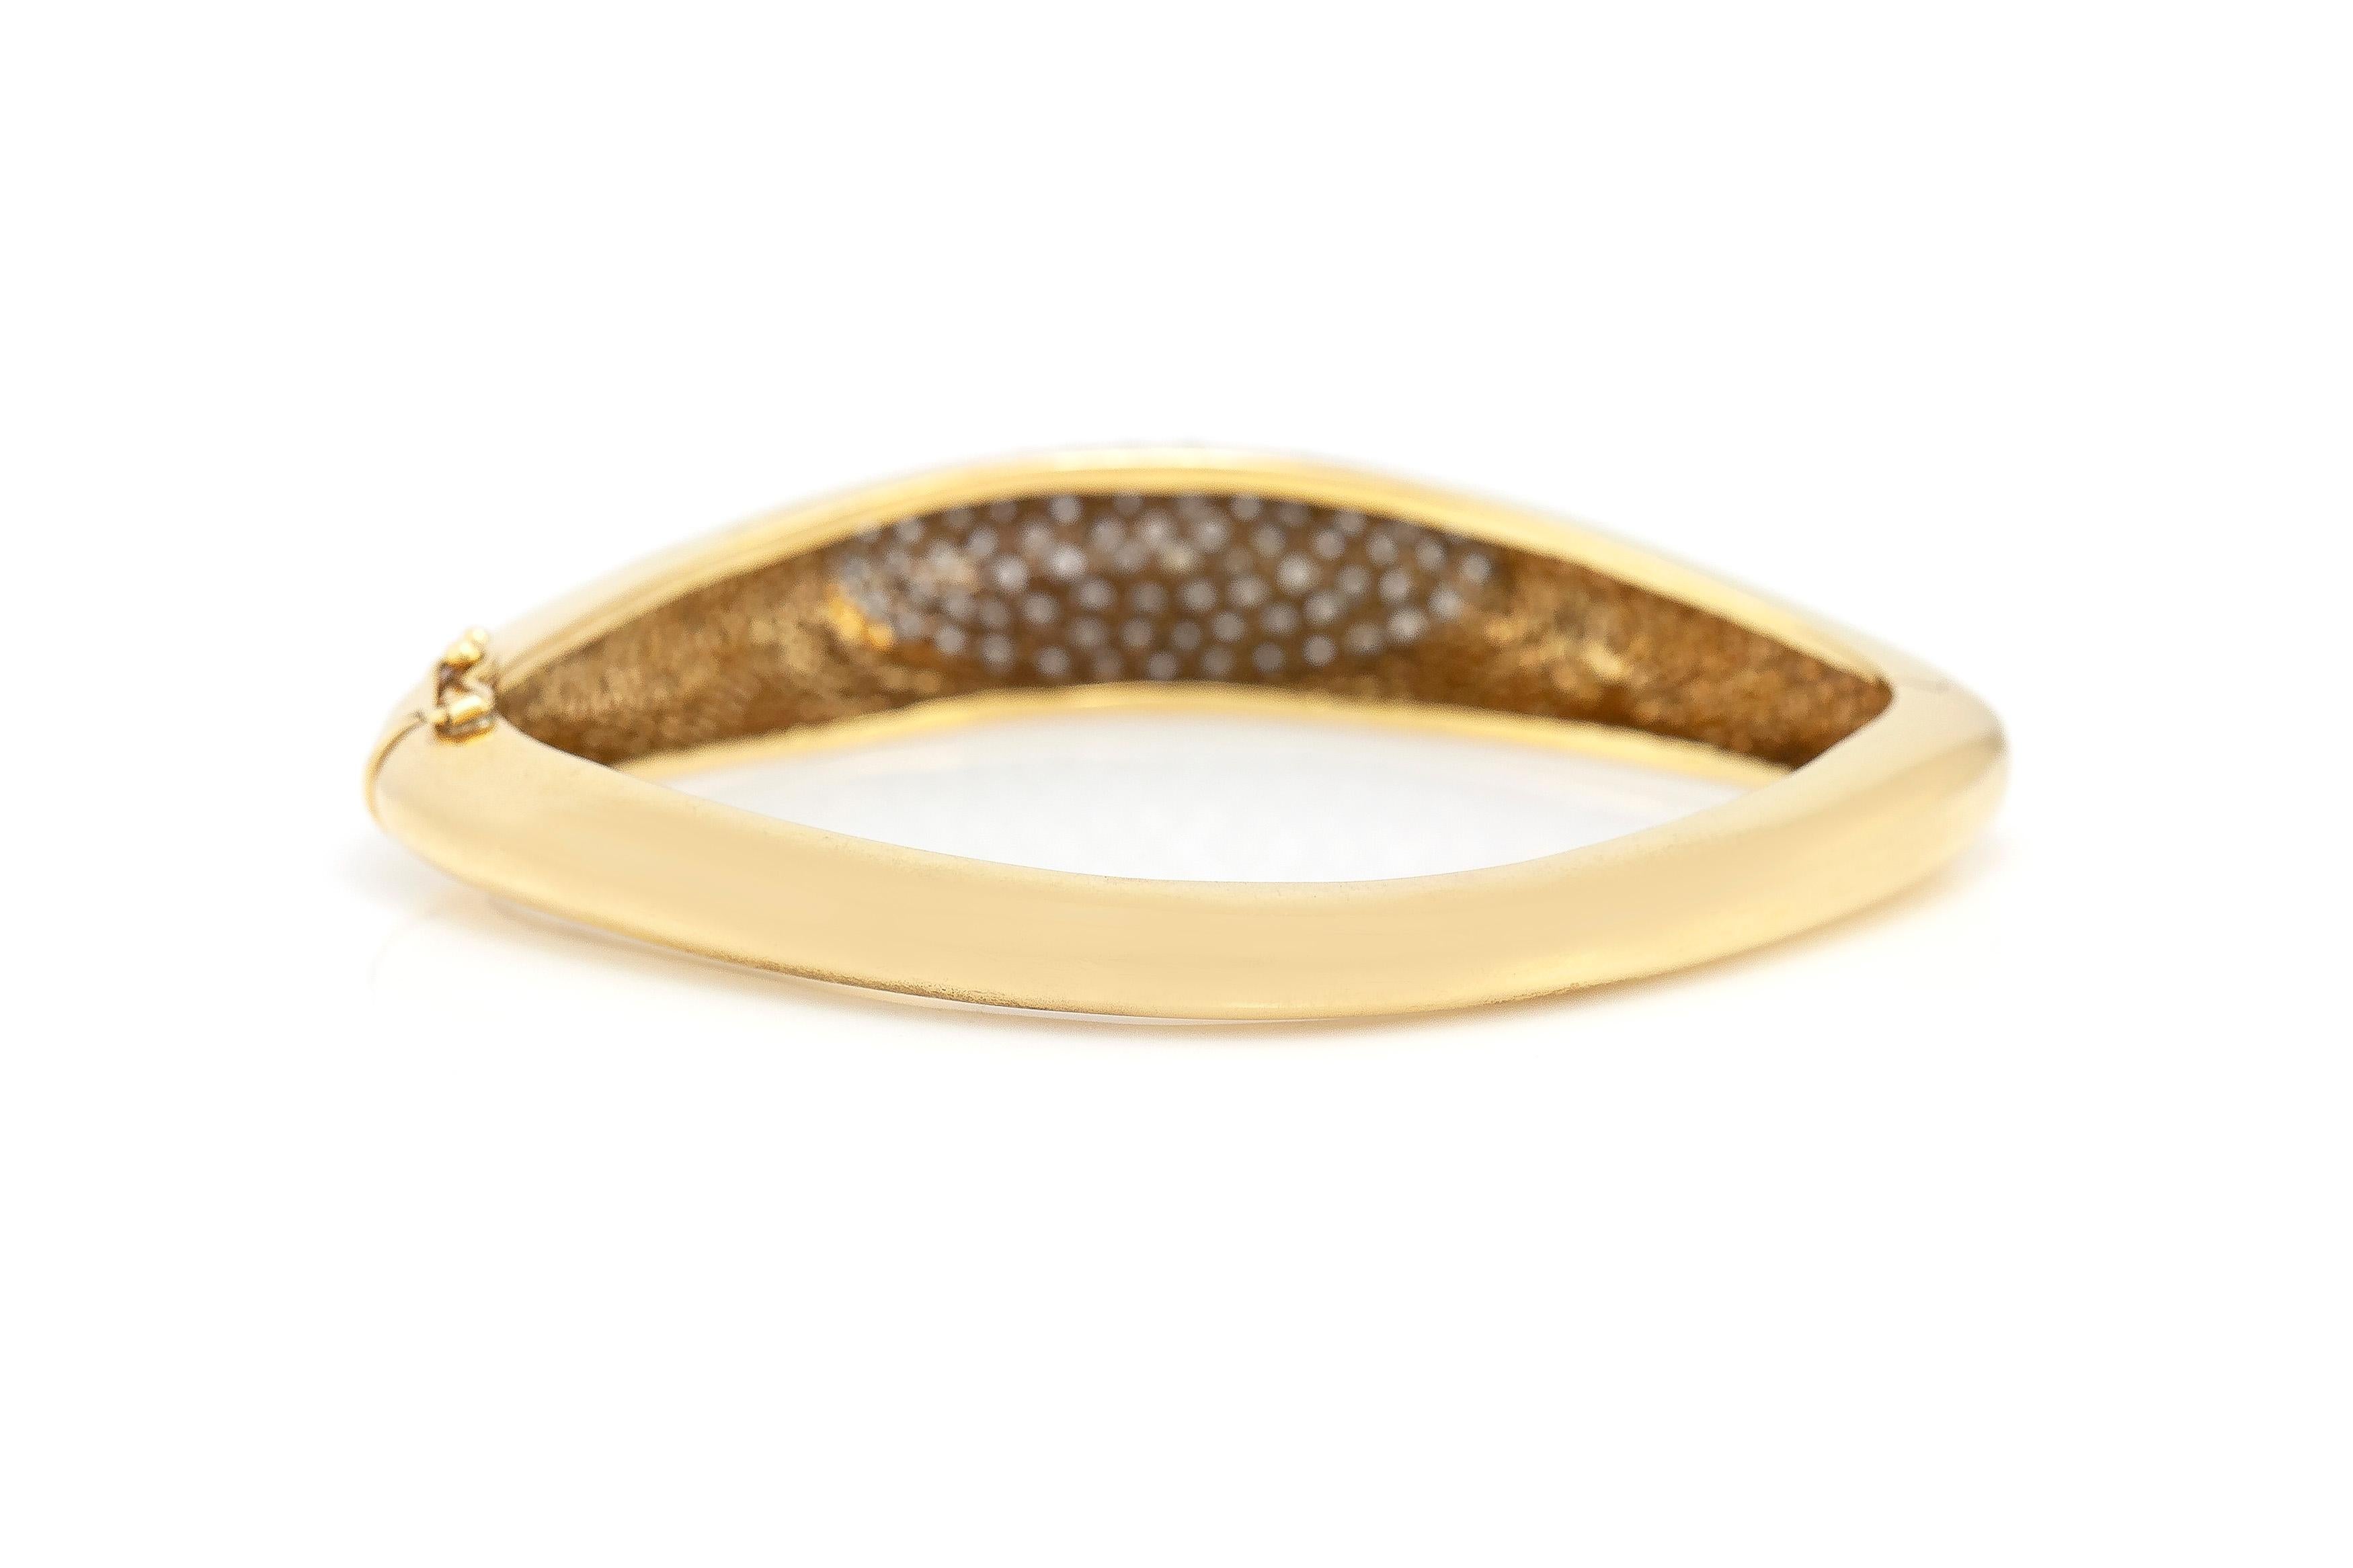 Elipse Bangle Bracelet with Diamond In Excellent Condition For Sale In New York, NY